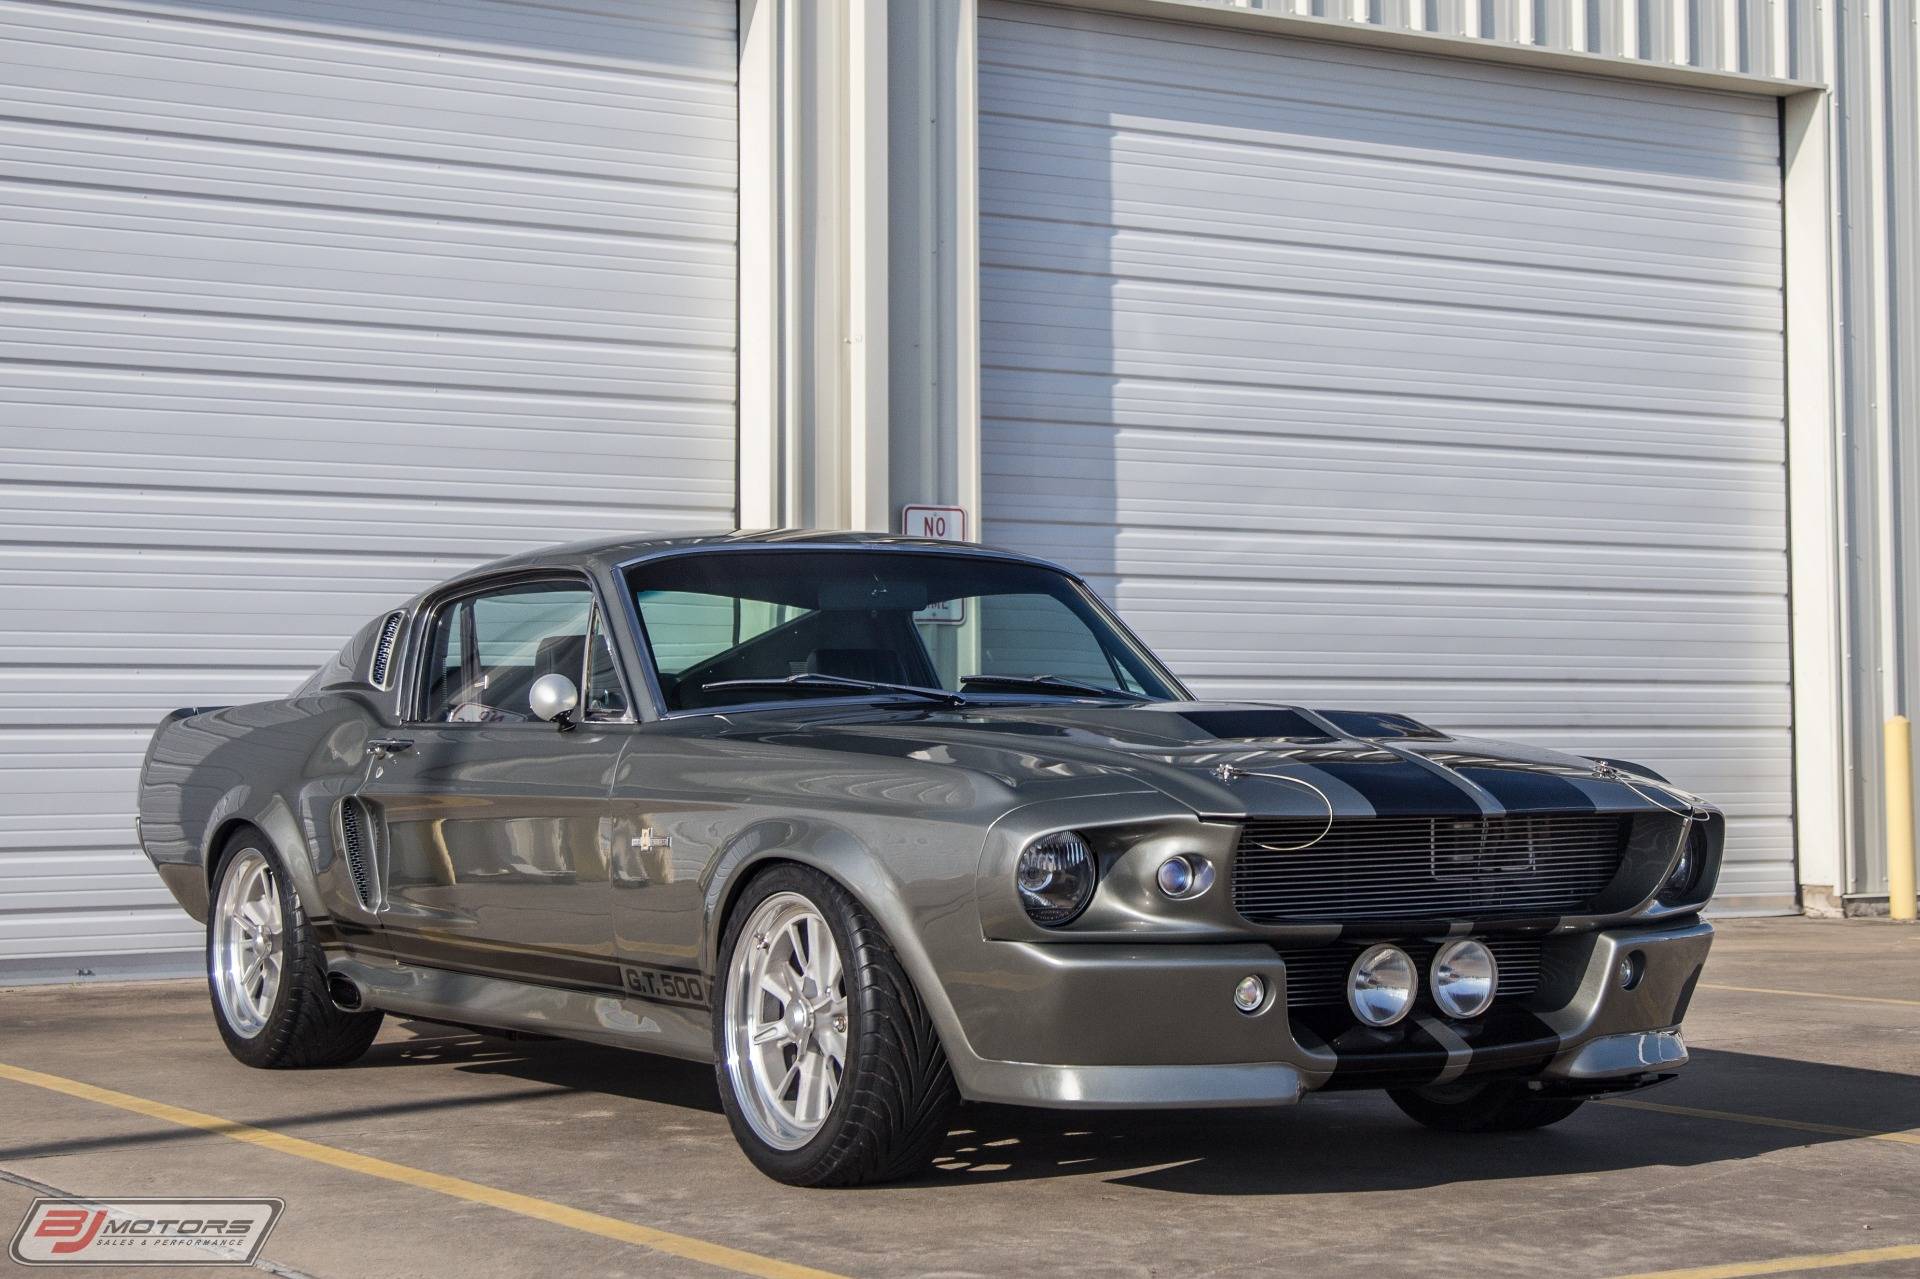 1967 ford shelby mustang gt500 eleanor: original movie car up for sale | carscoops